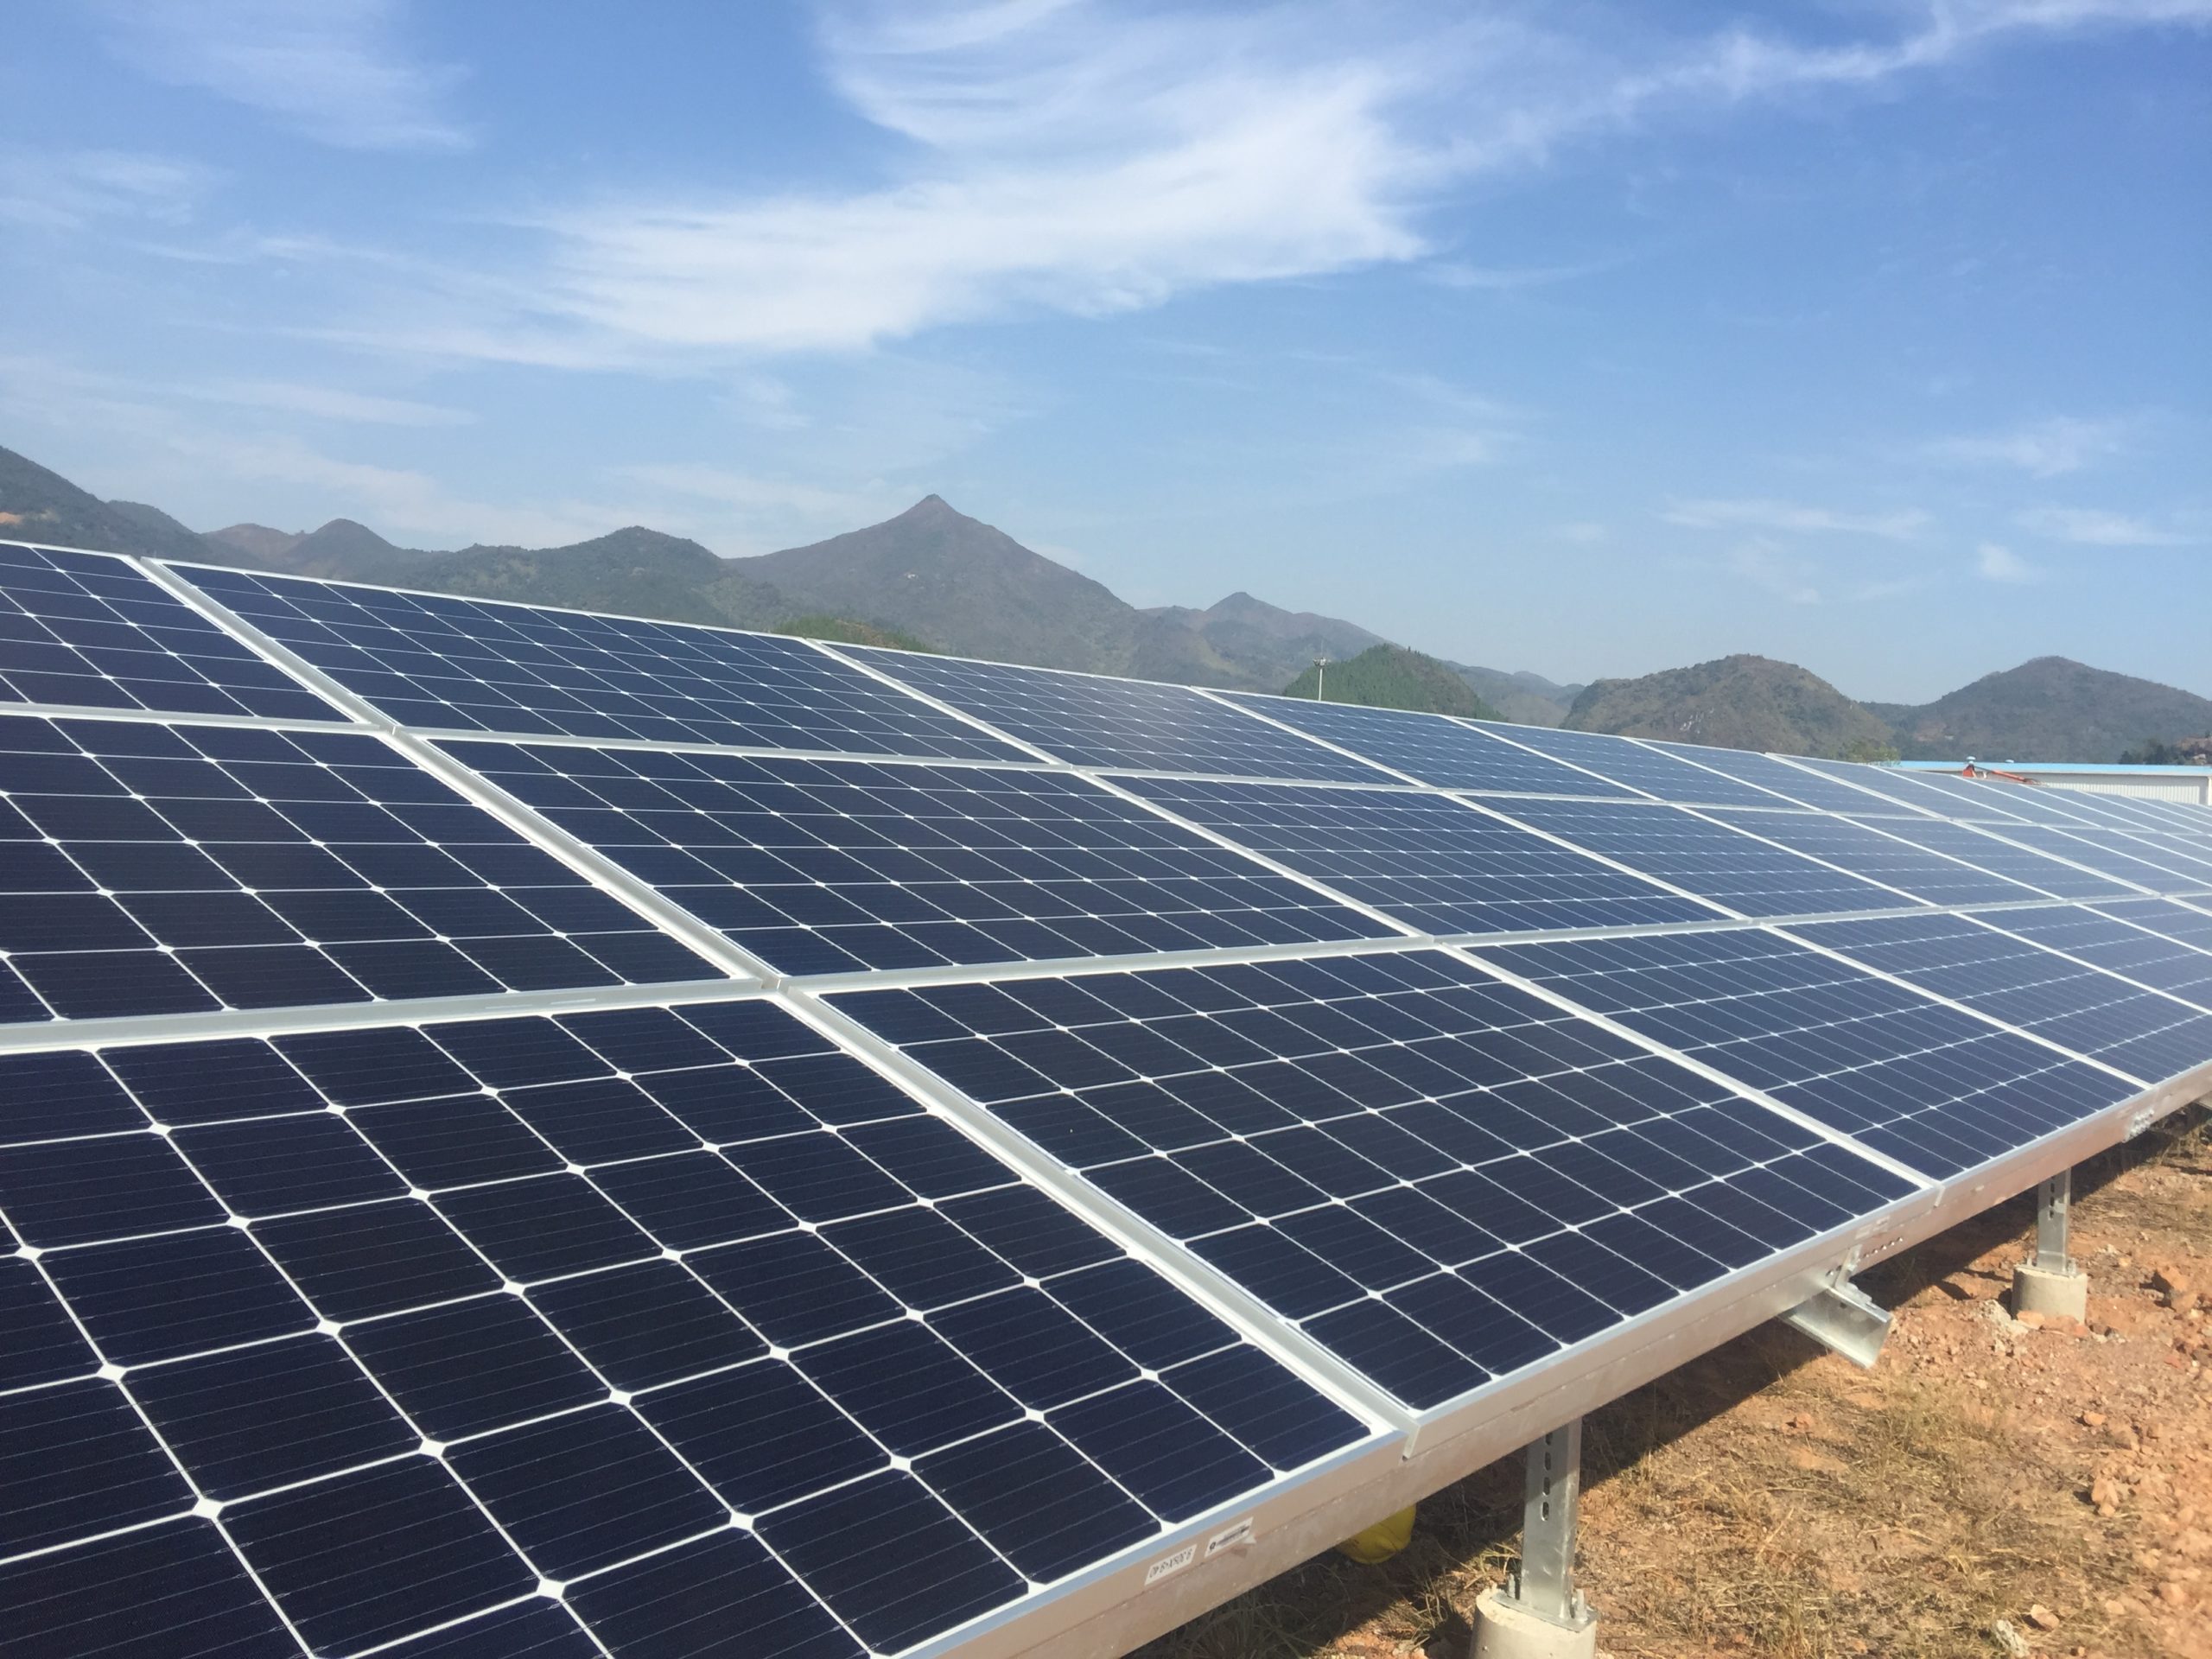 Kadoma Hotel and Conference Centre Solar Power Plant: Implementing renewable energy